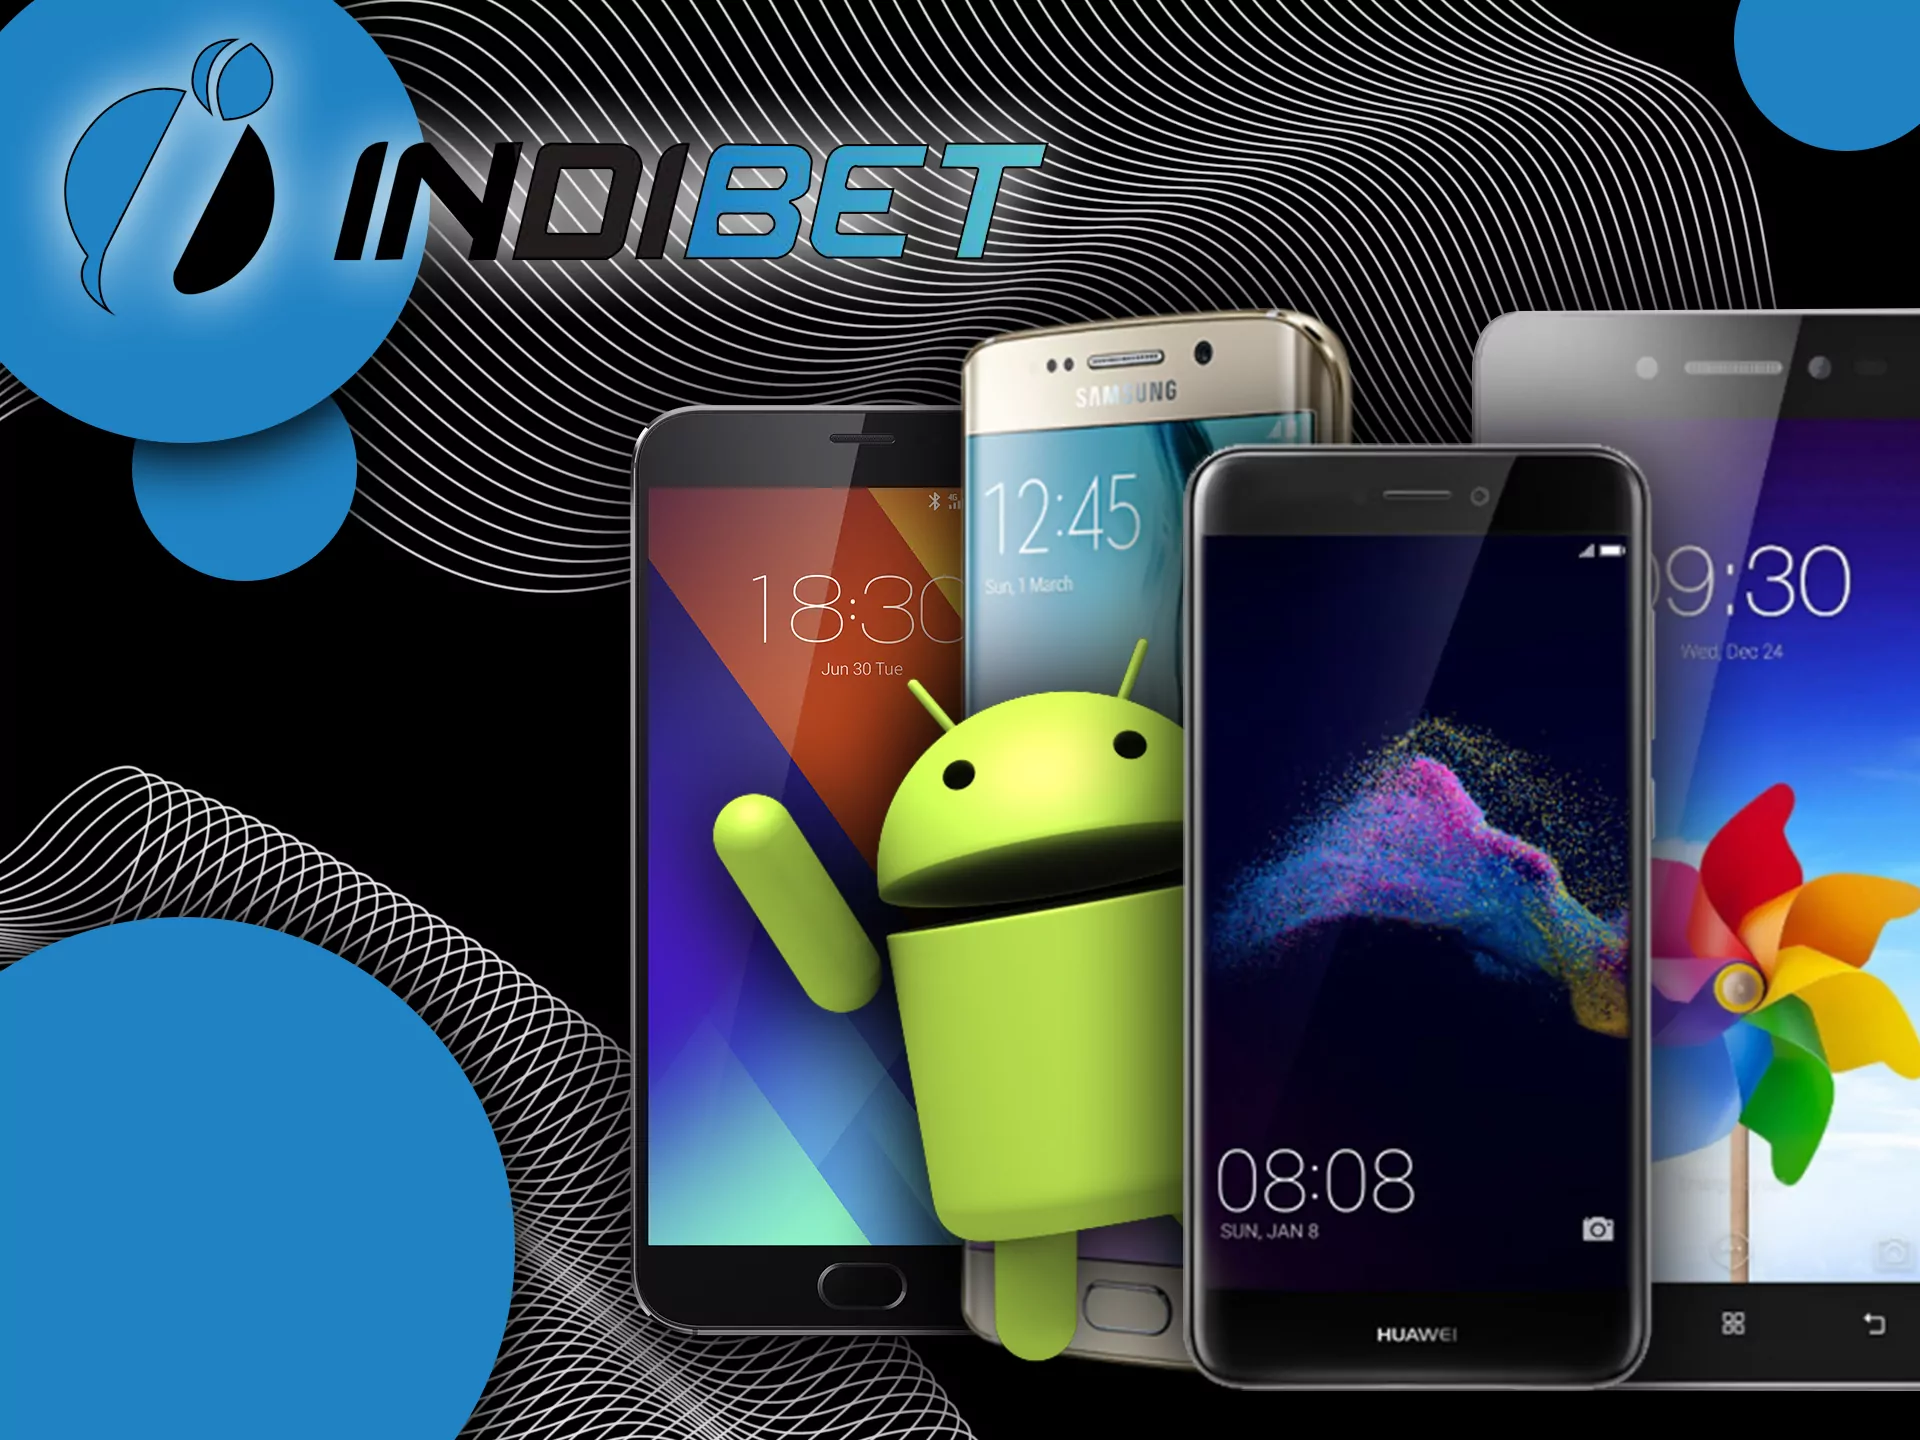 On every of this devices Indibet app will work smoothly.